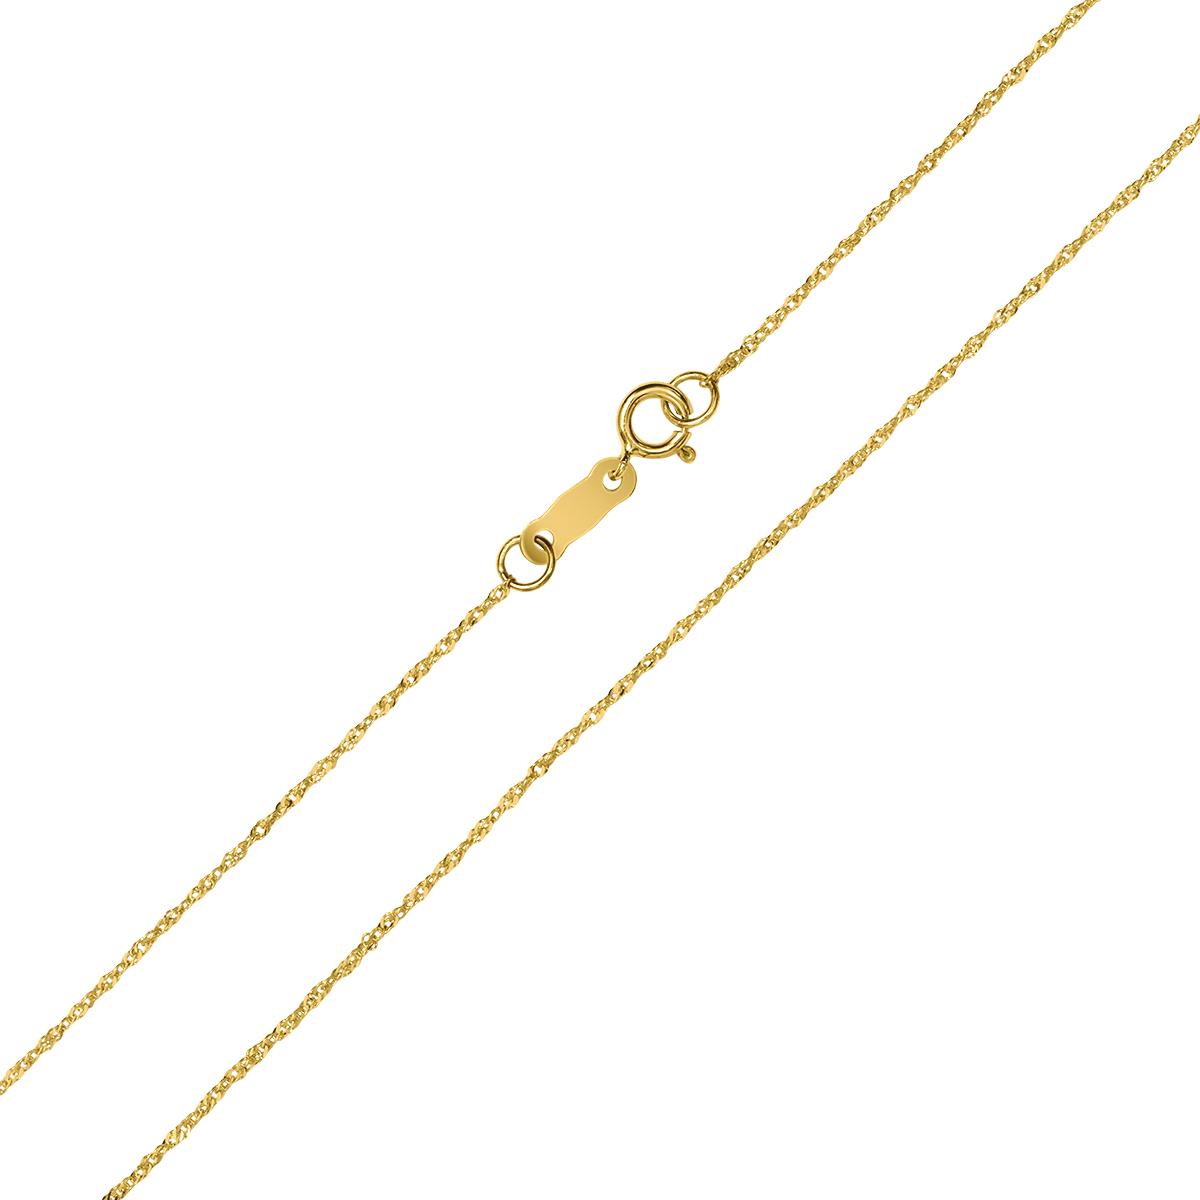 10K Yellow Gold 0.8MM Singapore Chain with Spring Ring Clasp - 18 Inch